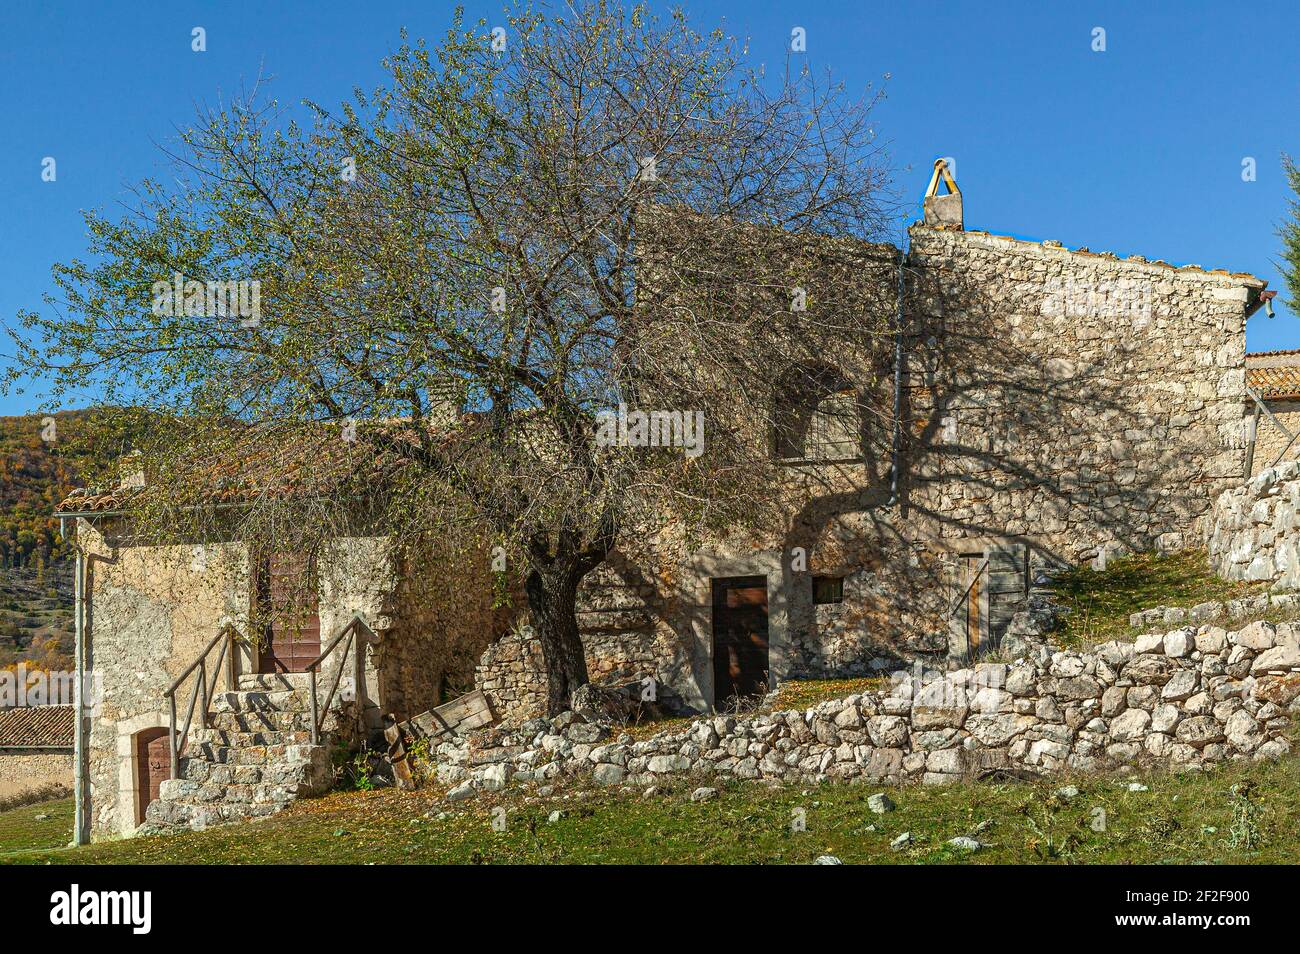 Ancient mountain agricultural pastoral communities. Old stone houses. Pagliare di Tione, Province of L'Aquila, Abruzzo, Italy, europe Stock Photo